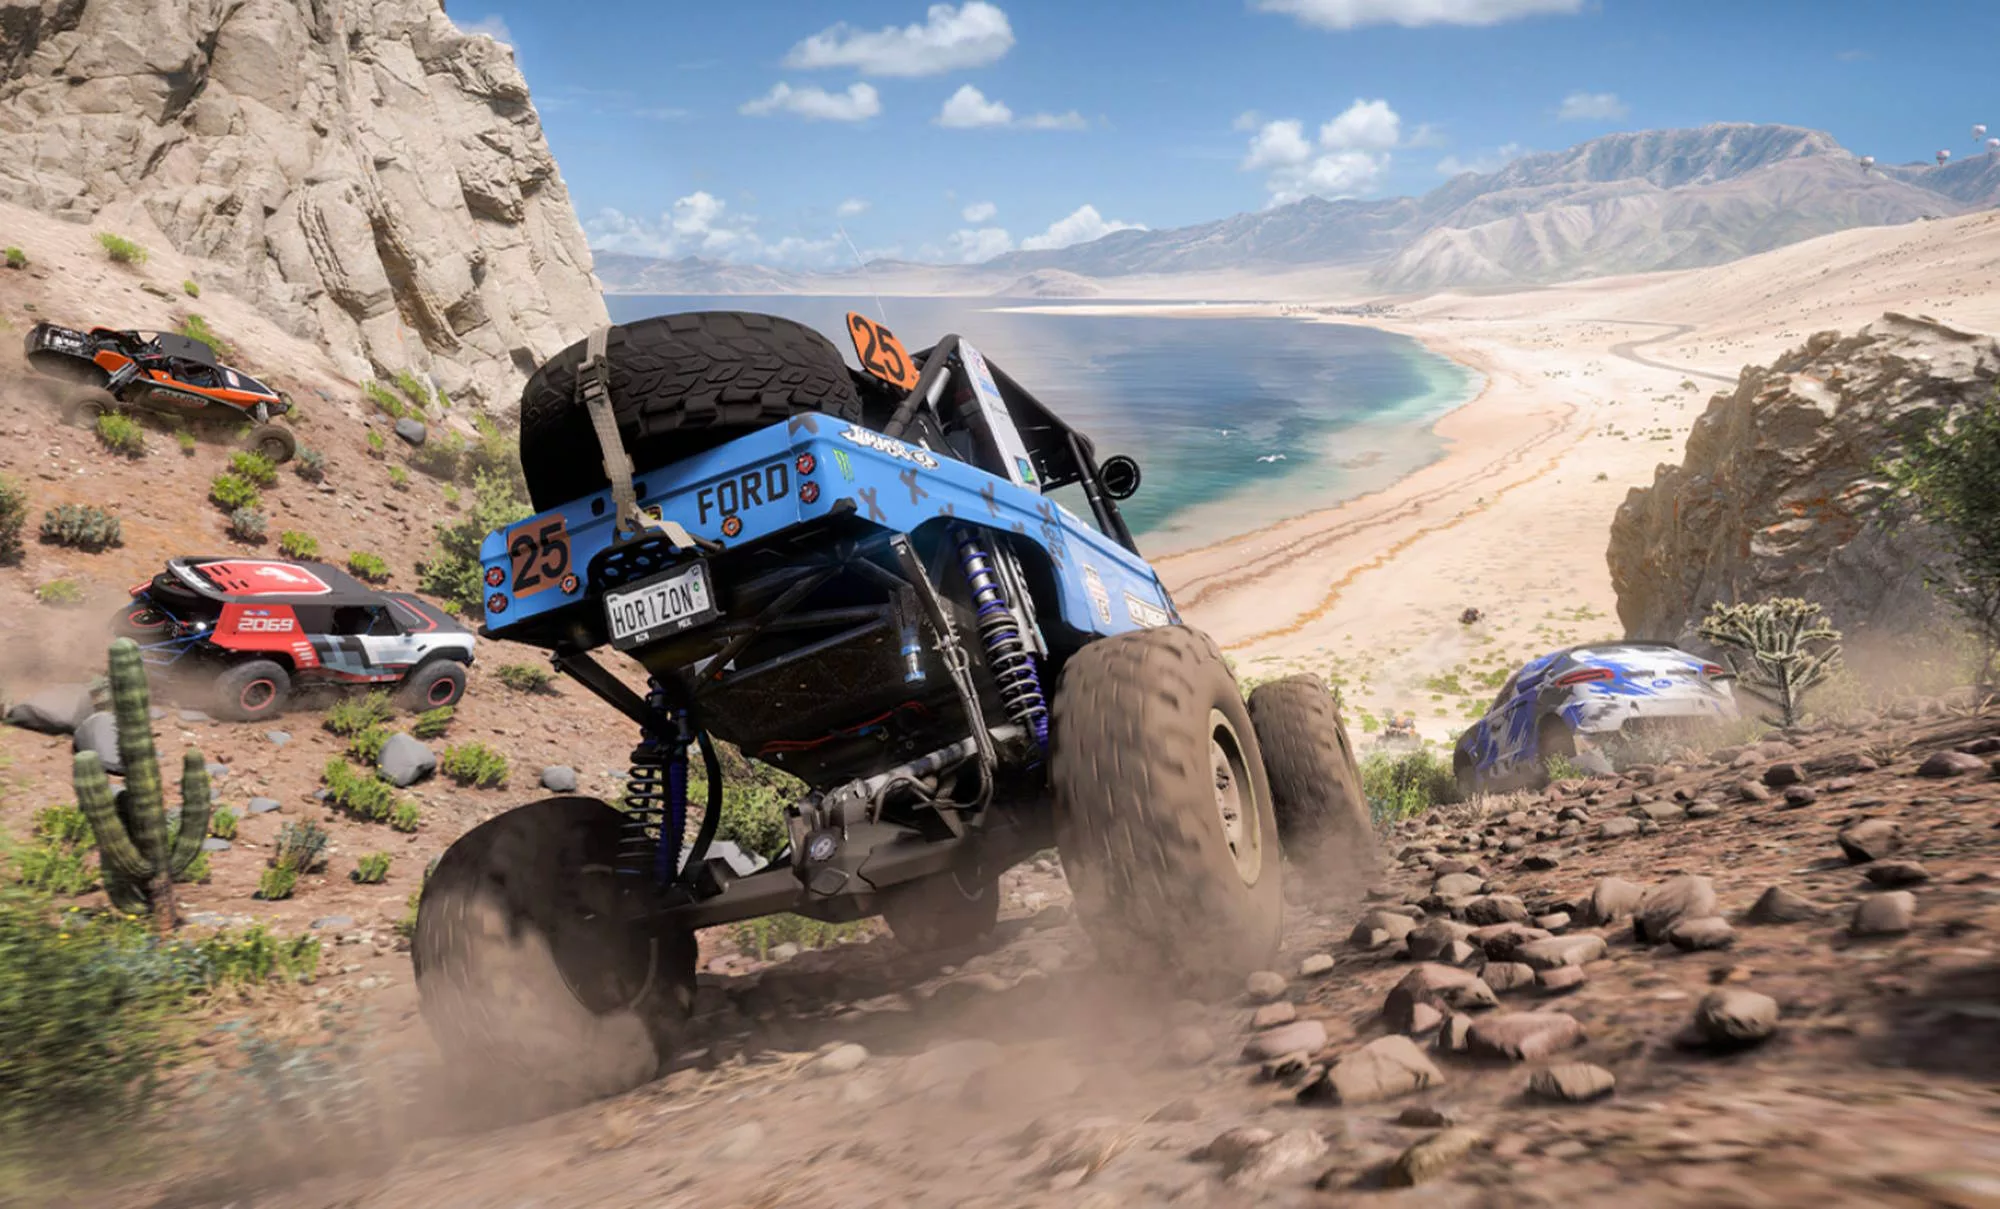 A screenshot from Forza Horizon 5 showing an off-road rally vehicle in a race